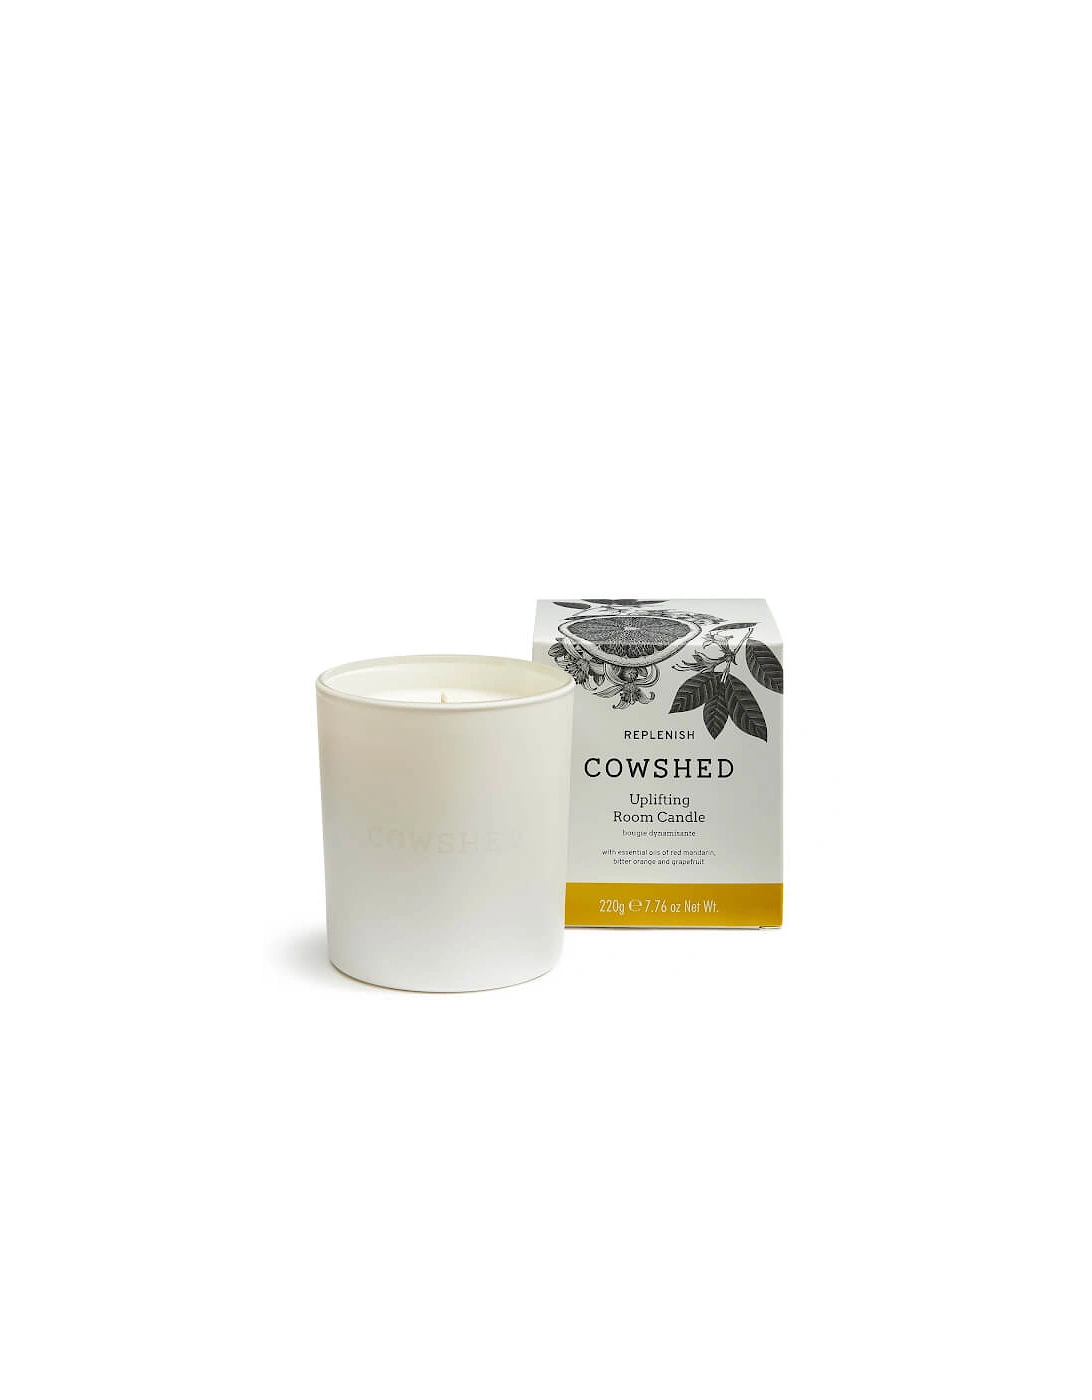 REPLENISH Uplifting Room Candle - Cowshed, 2 of 1